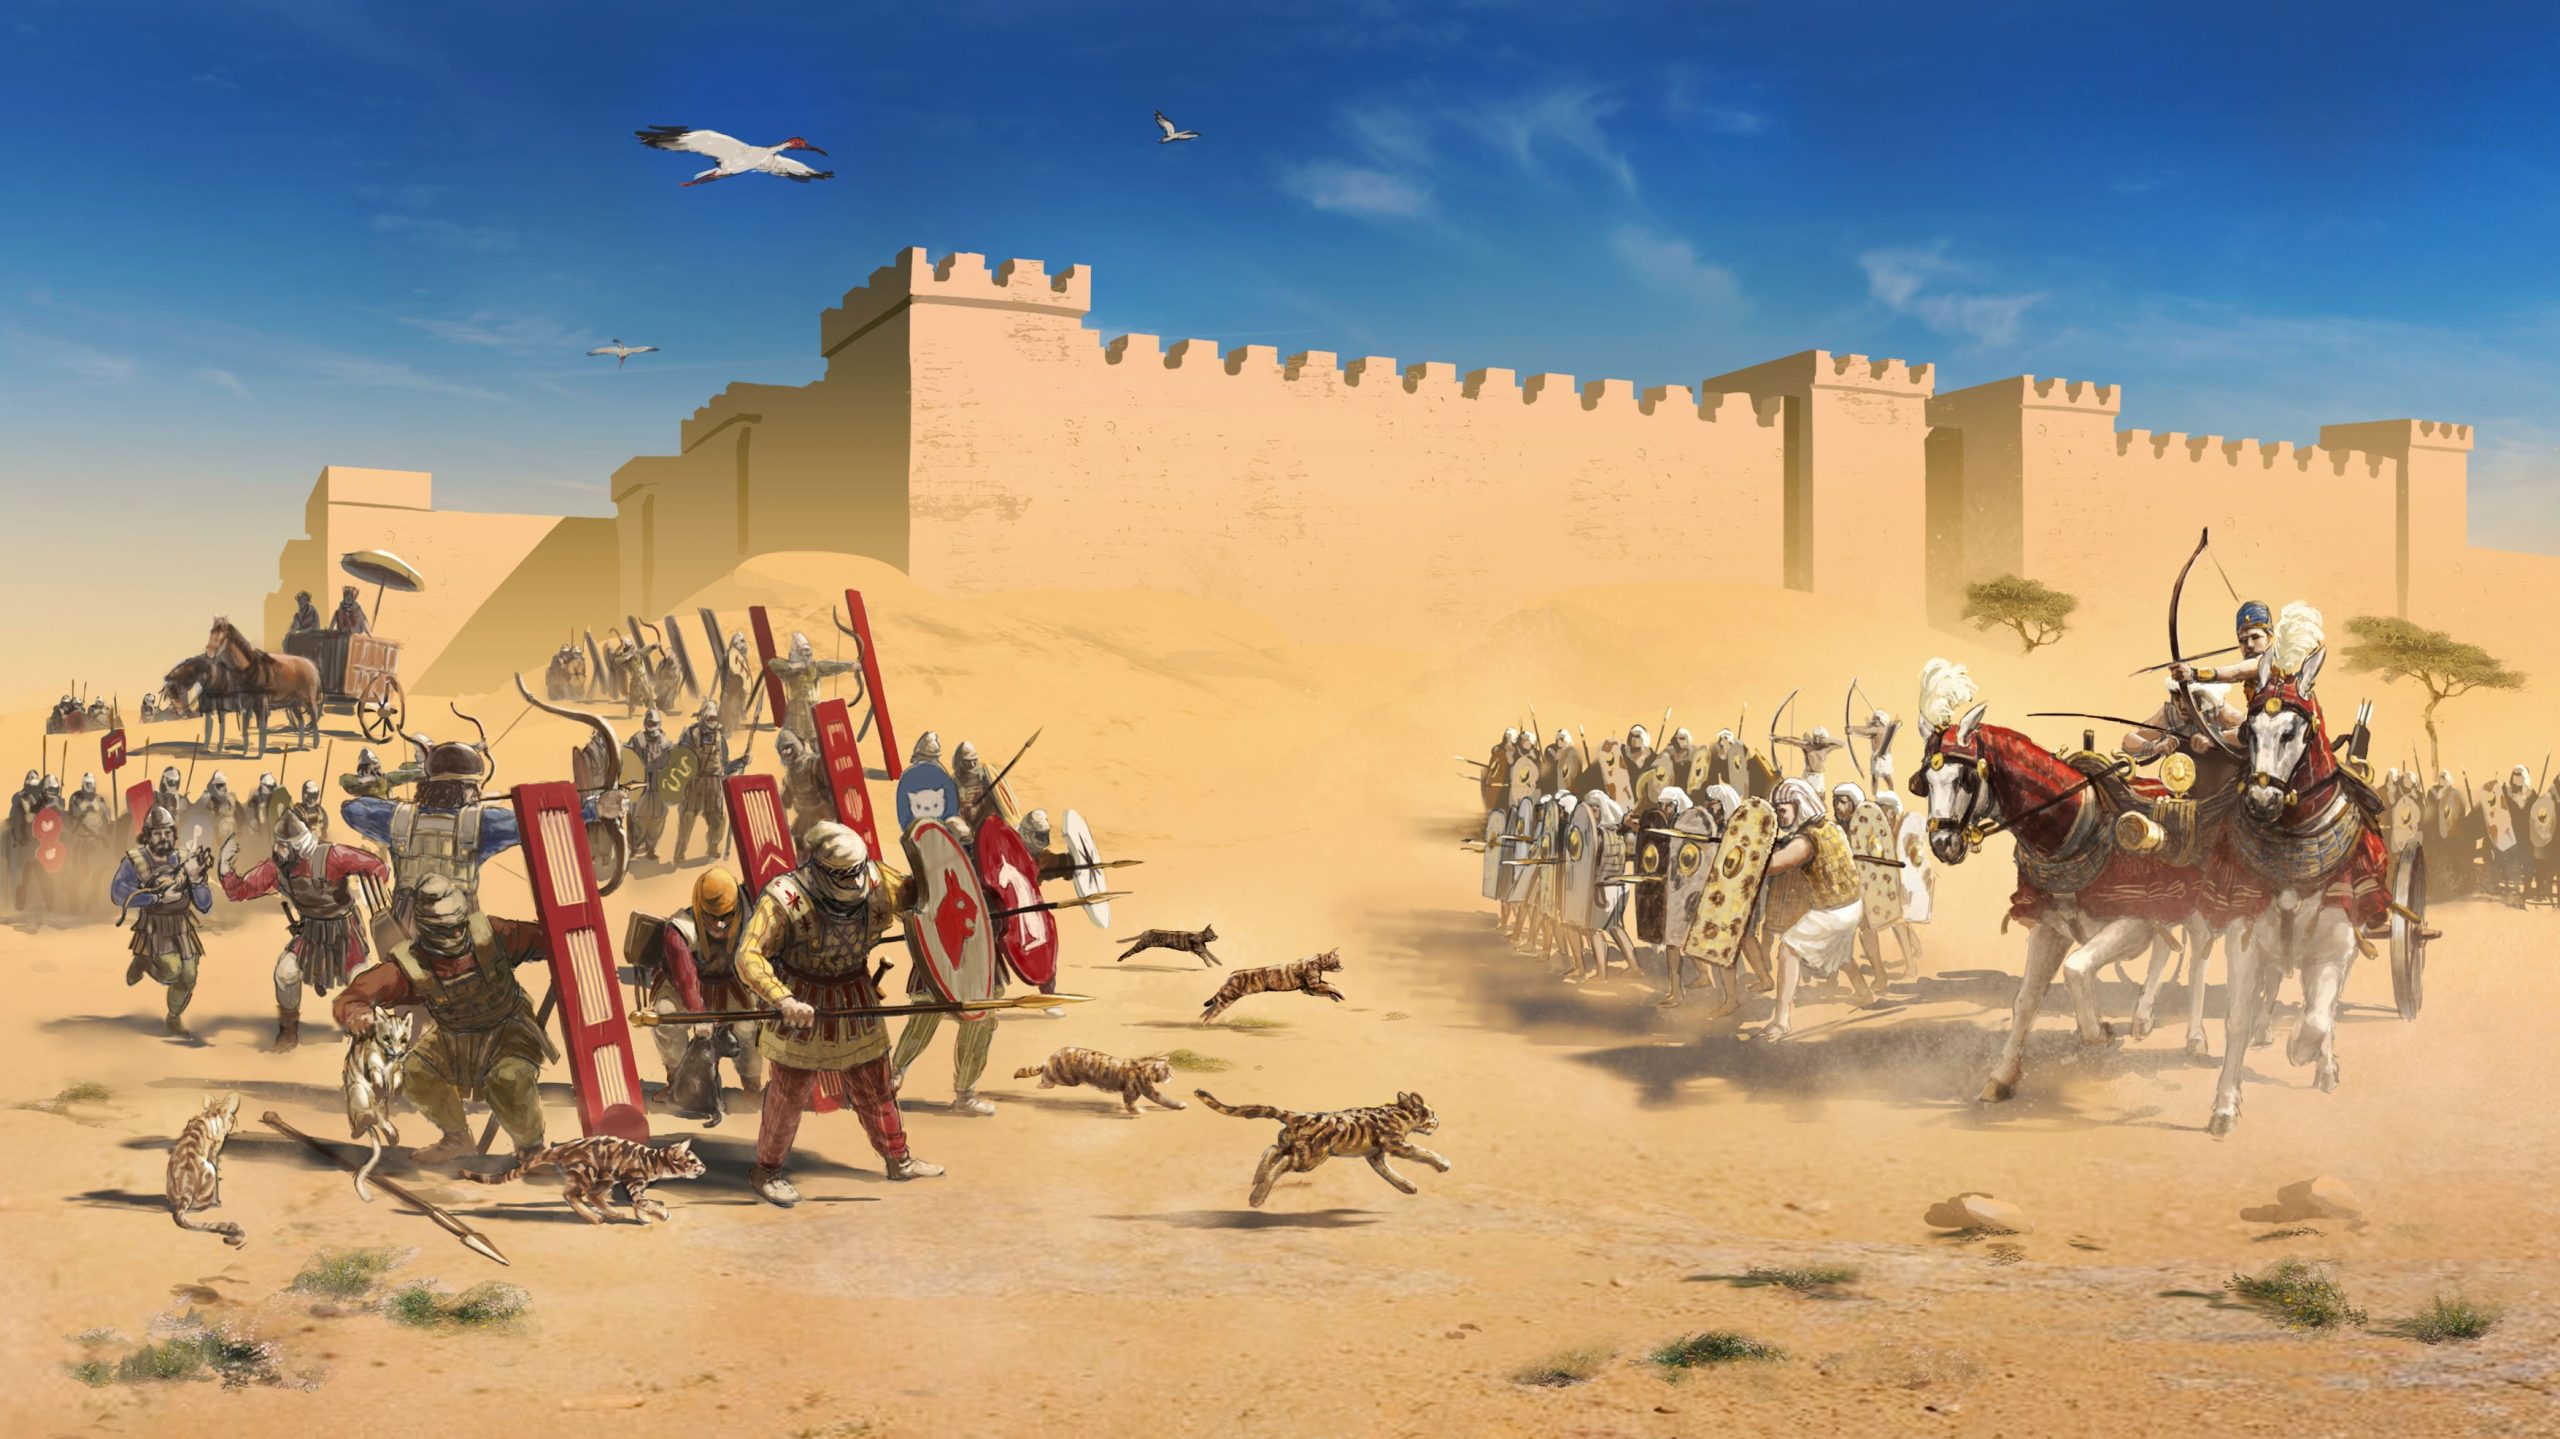 Artist's impression of the Battle of Pelusium (525 BCE), showing the Persian army led by Cambyses II (525-522 BCE) on the left, and the Egyptian army led by Psametik III (526-525 BCE) on the right. The battle was a decisive Persian victory brought about by the Persian's clever use of cats: As cats were sacred to the Egyptians, the Persian army herded cats (and other animals) in front of their battle line, and painted cats onto their shields. The Egyptians, afraid to hurt sacred cats and incurring the wrath of Bastet, were shaken and decisively defeated. Following the battle, Persia annexed Egypt.